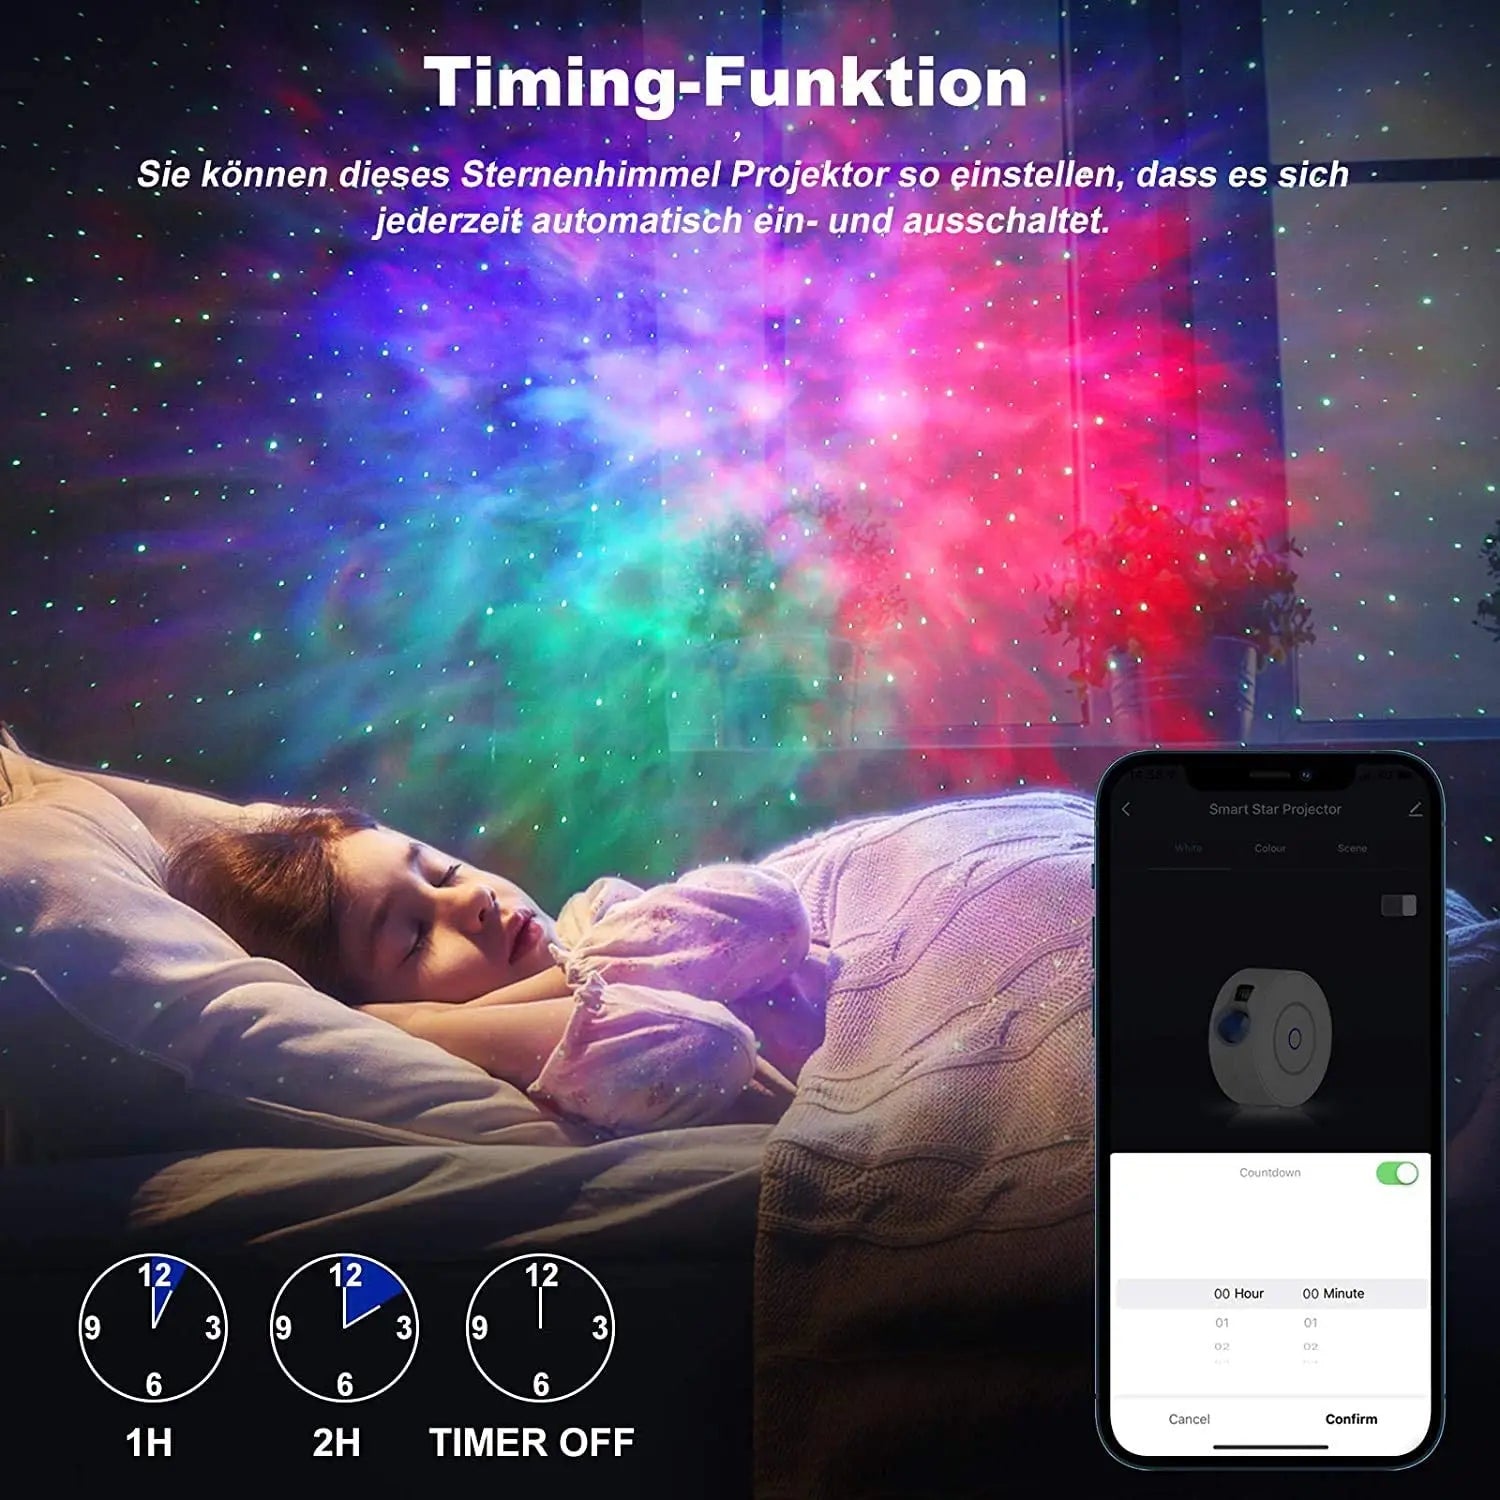 WiFi Smart Star Projector with Voice and App Control